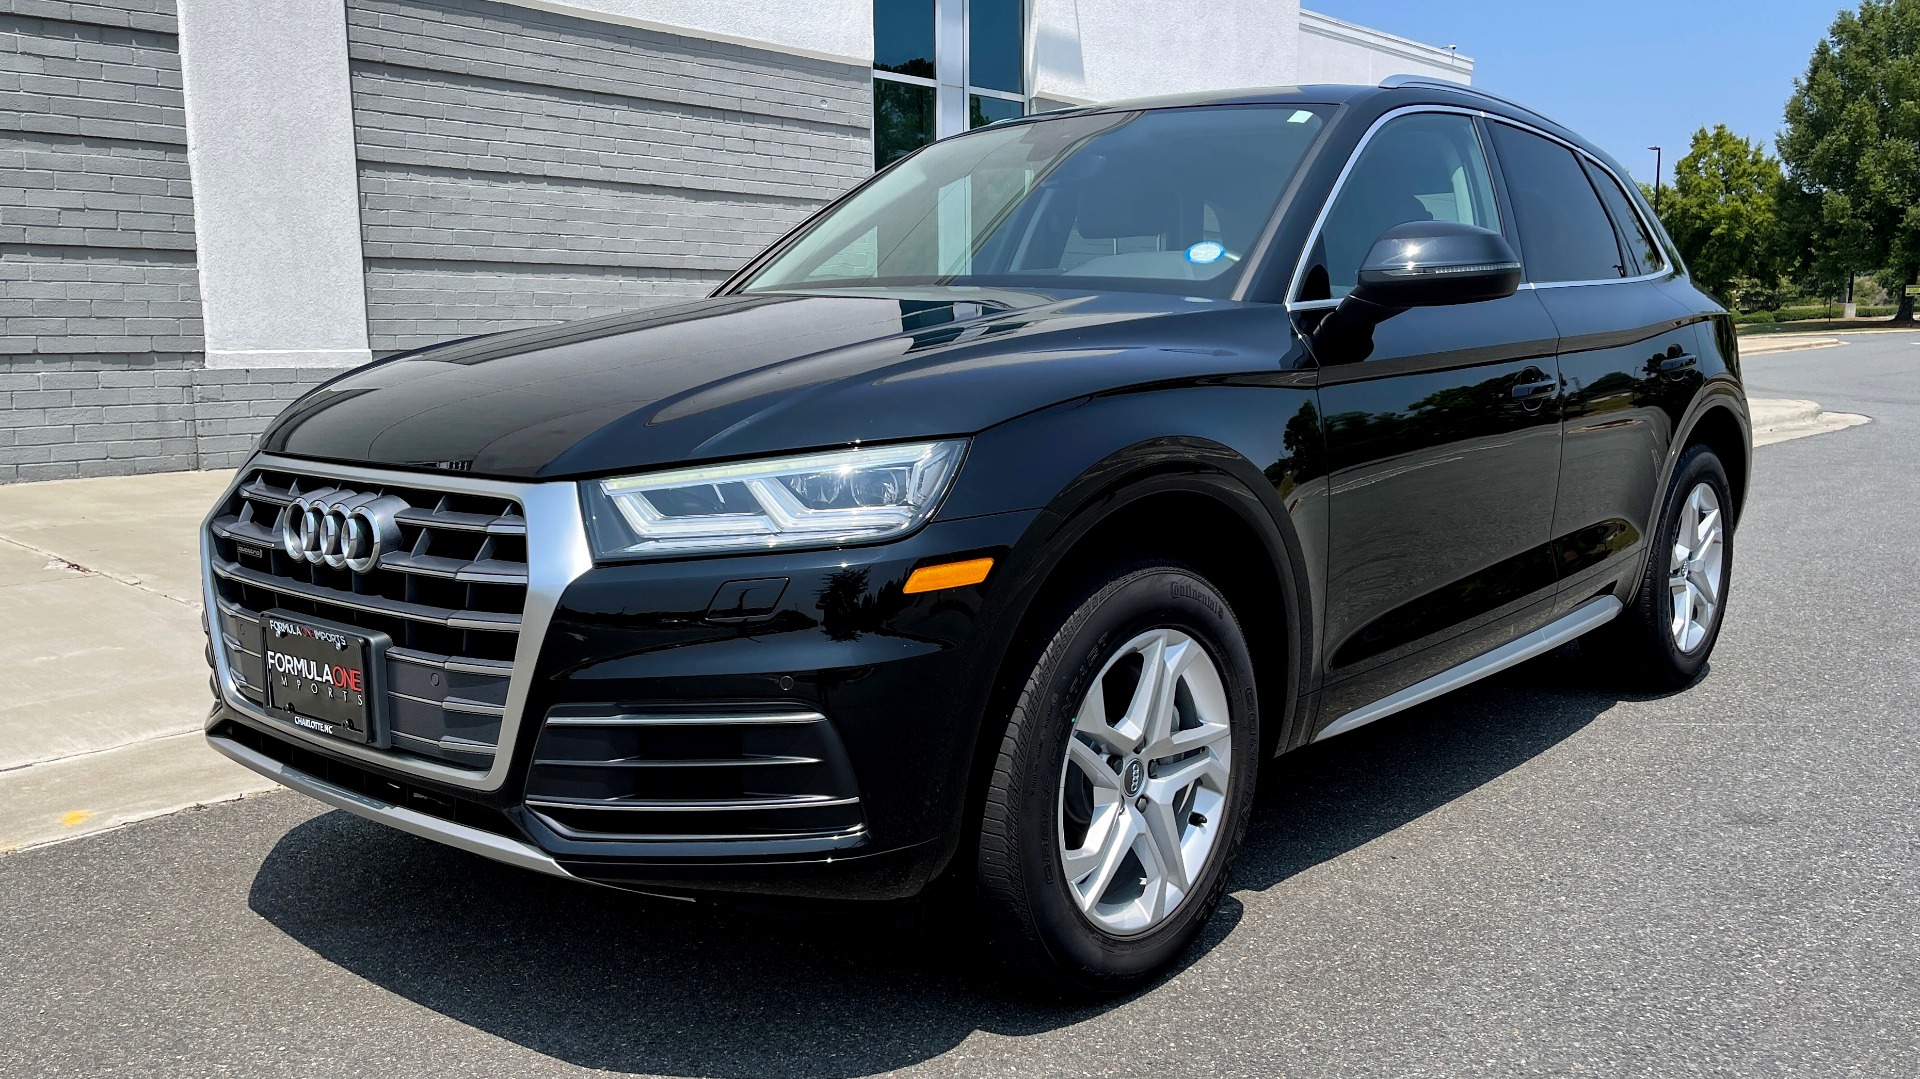 Used 2018 Audi Q5 PREMIUM PLUS 2.0L / QUATTRO AWD / PANO-ROOF / REARVIEW for sale Sold at Formula Imports in Charlotte NC 28227 3